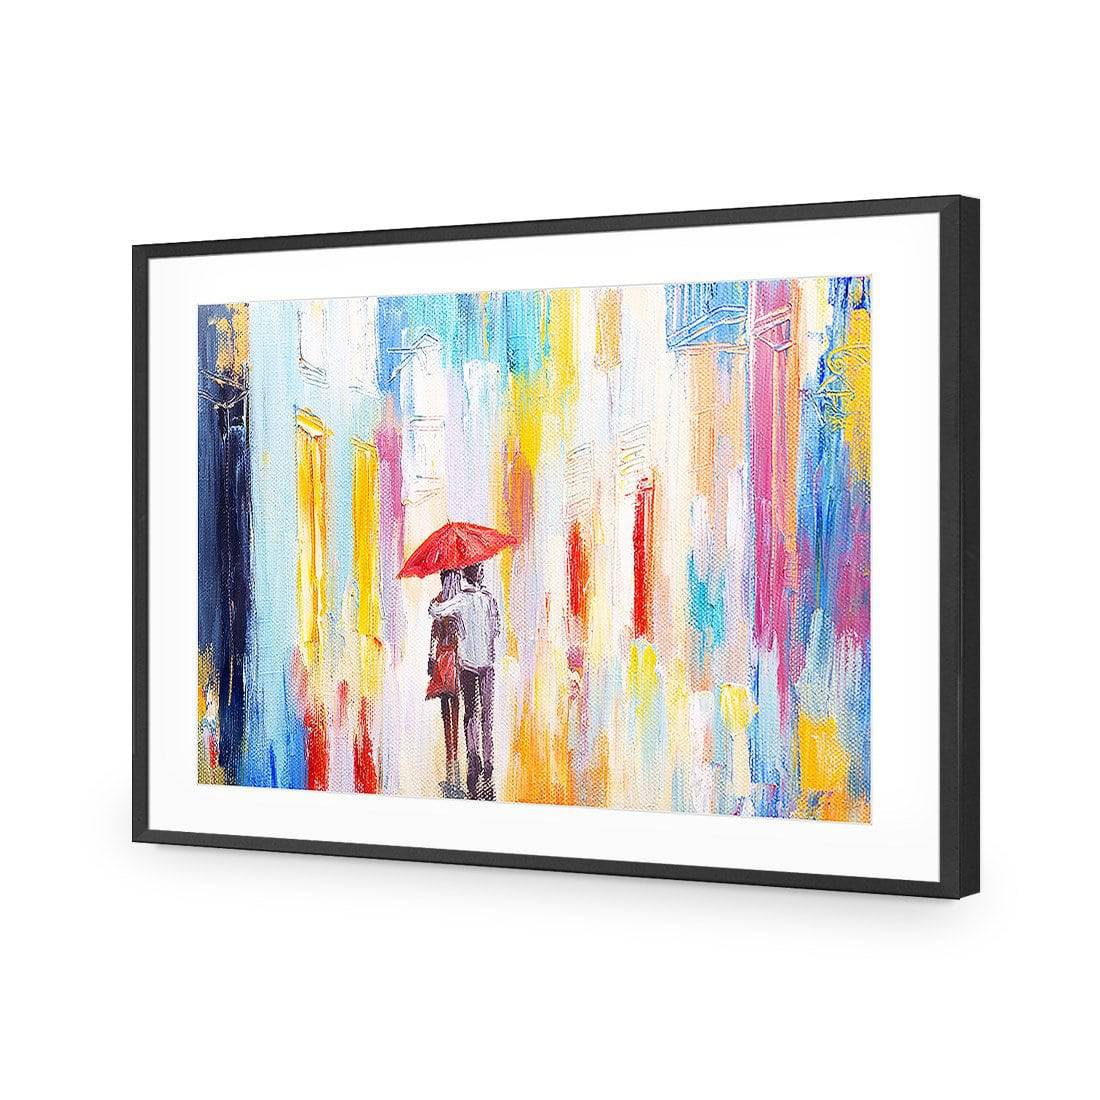 Heading Home-Acrylic-Wall Art Design-With Border-Acrylic - Black Frame-59X40cm-Wall Art Designs